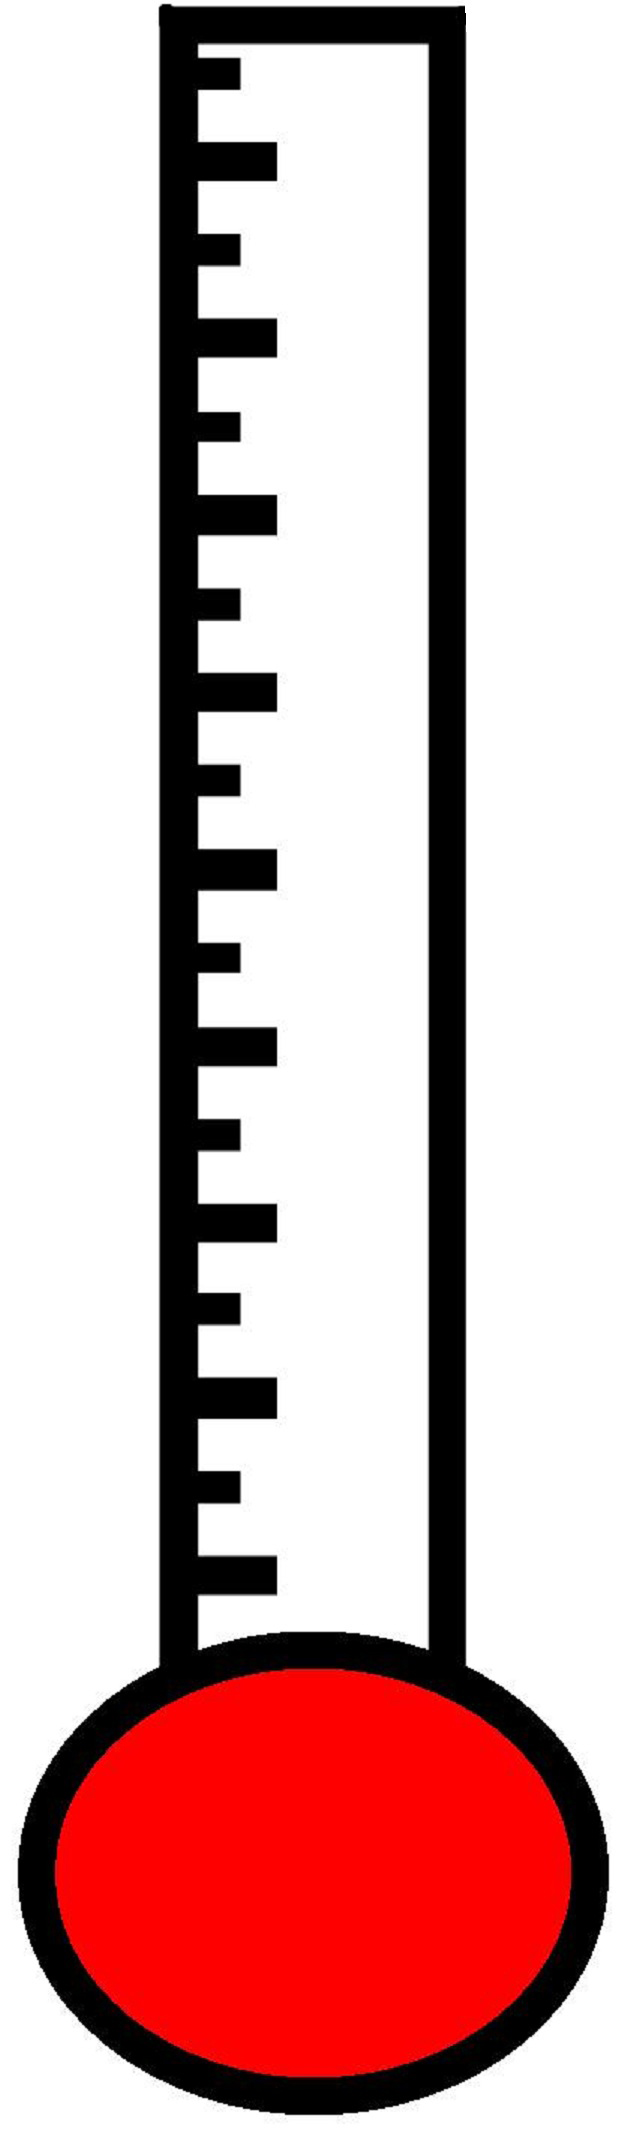 Image gallery for : blank thermometer template